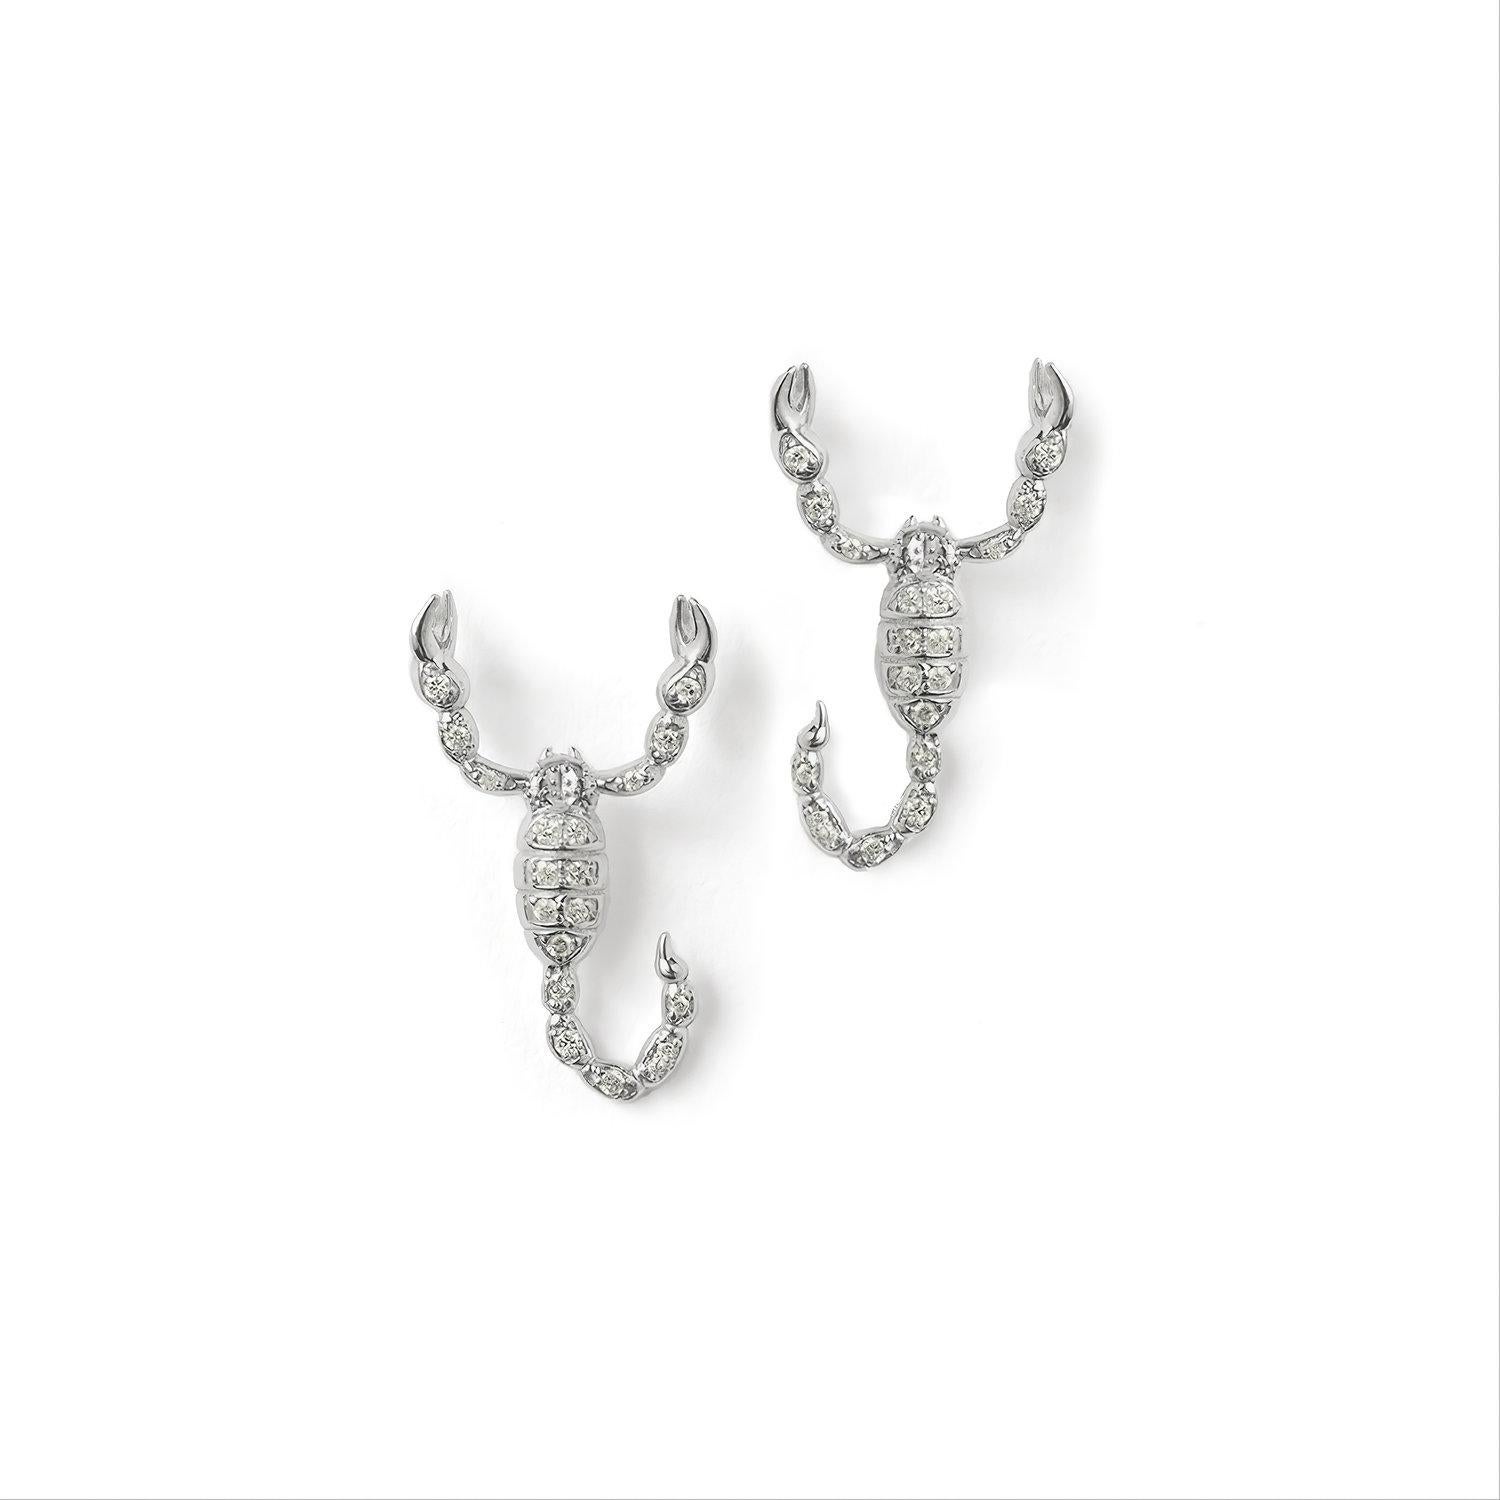 Unleash your fierce and captivating style with our Small Scorpion Diamond Earrings in 14k White Gold. These extraordinary earrings embody the allure of an ominous creature, leaving a lasting impression on all who behold them.

Crafted with